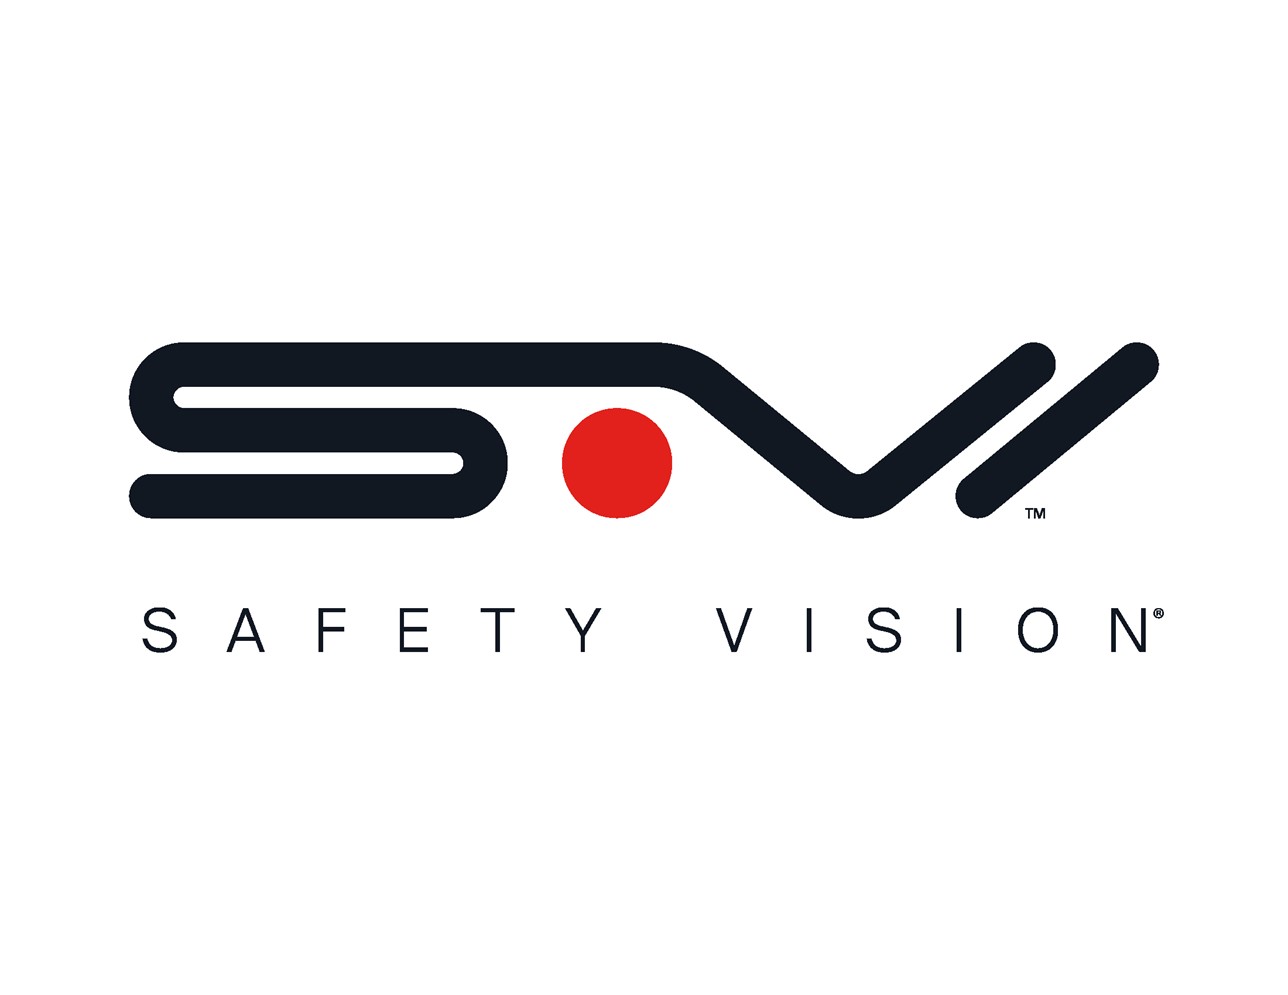 Safety vision